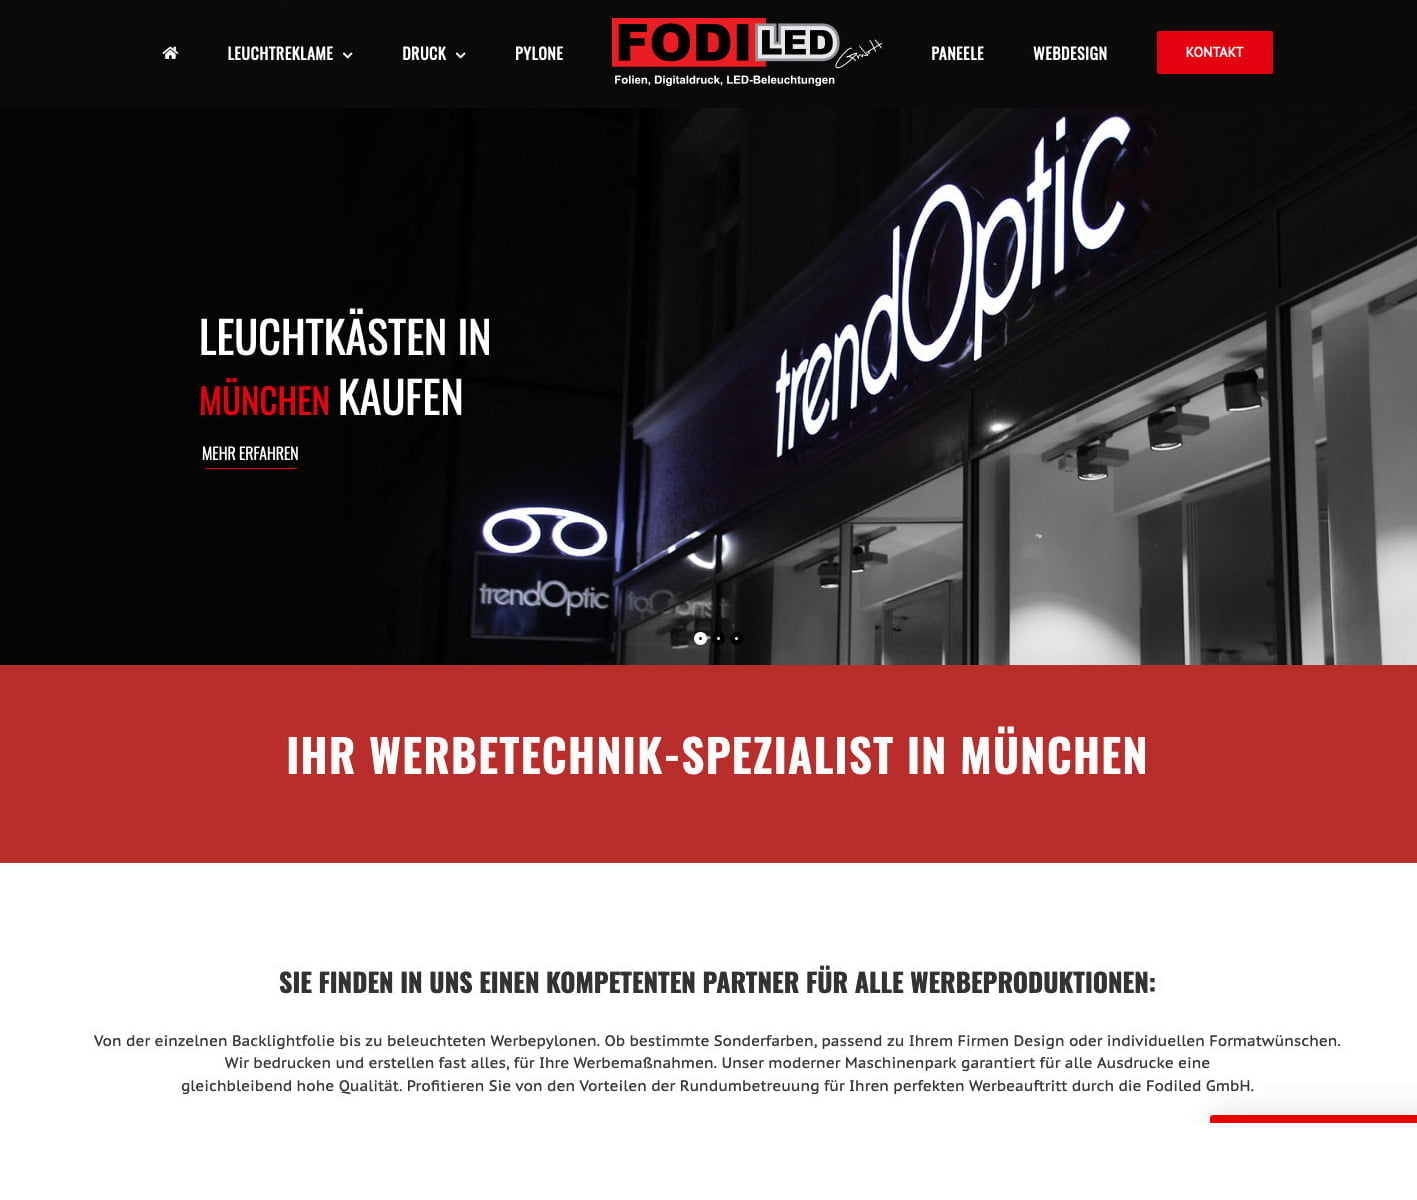 webdesign fodiled gmbh preview